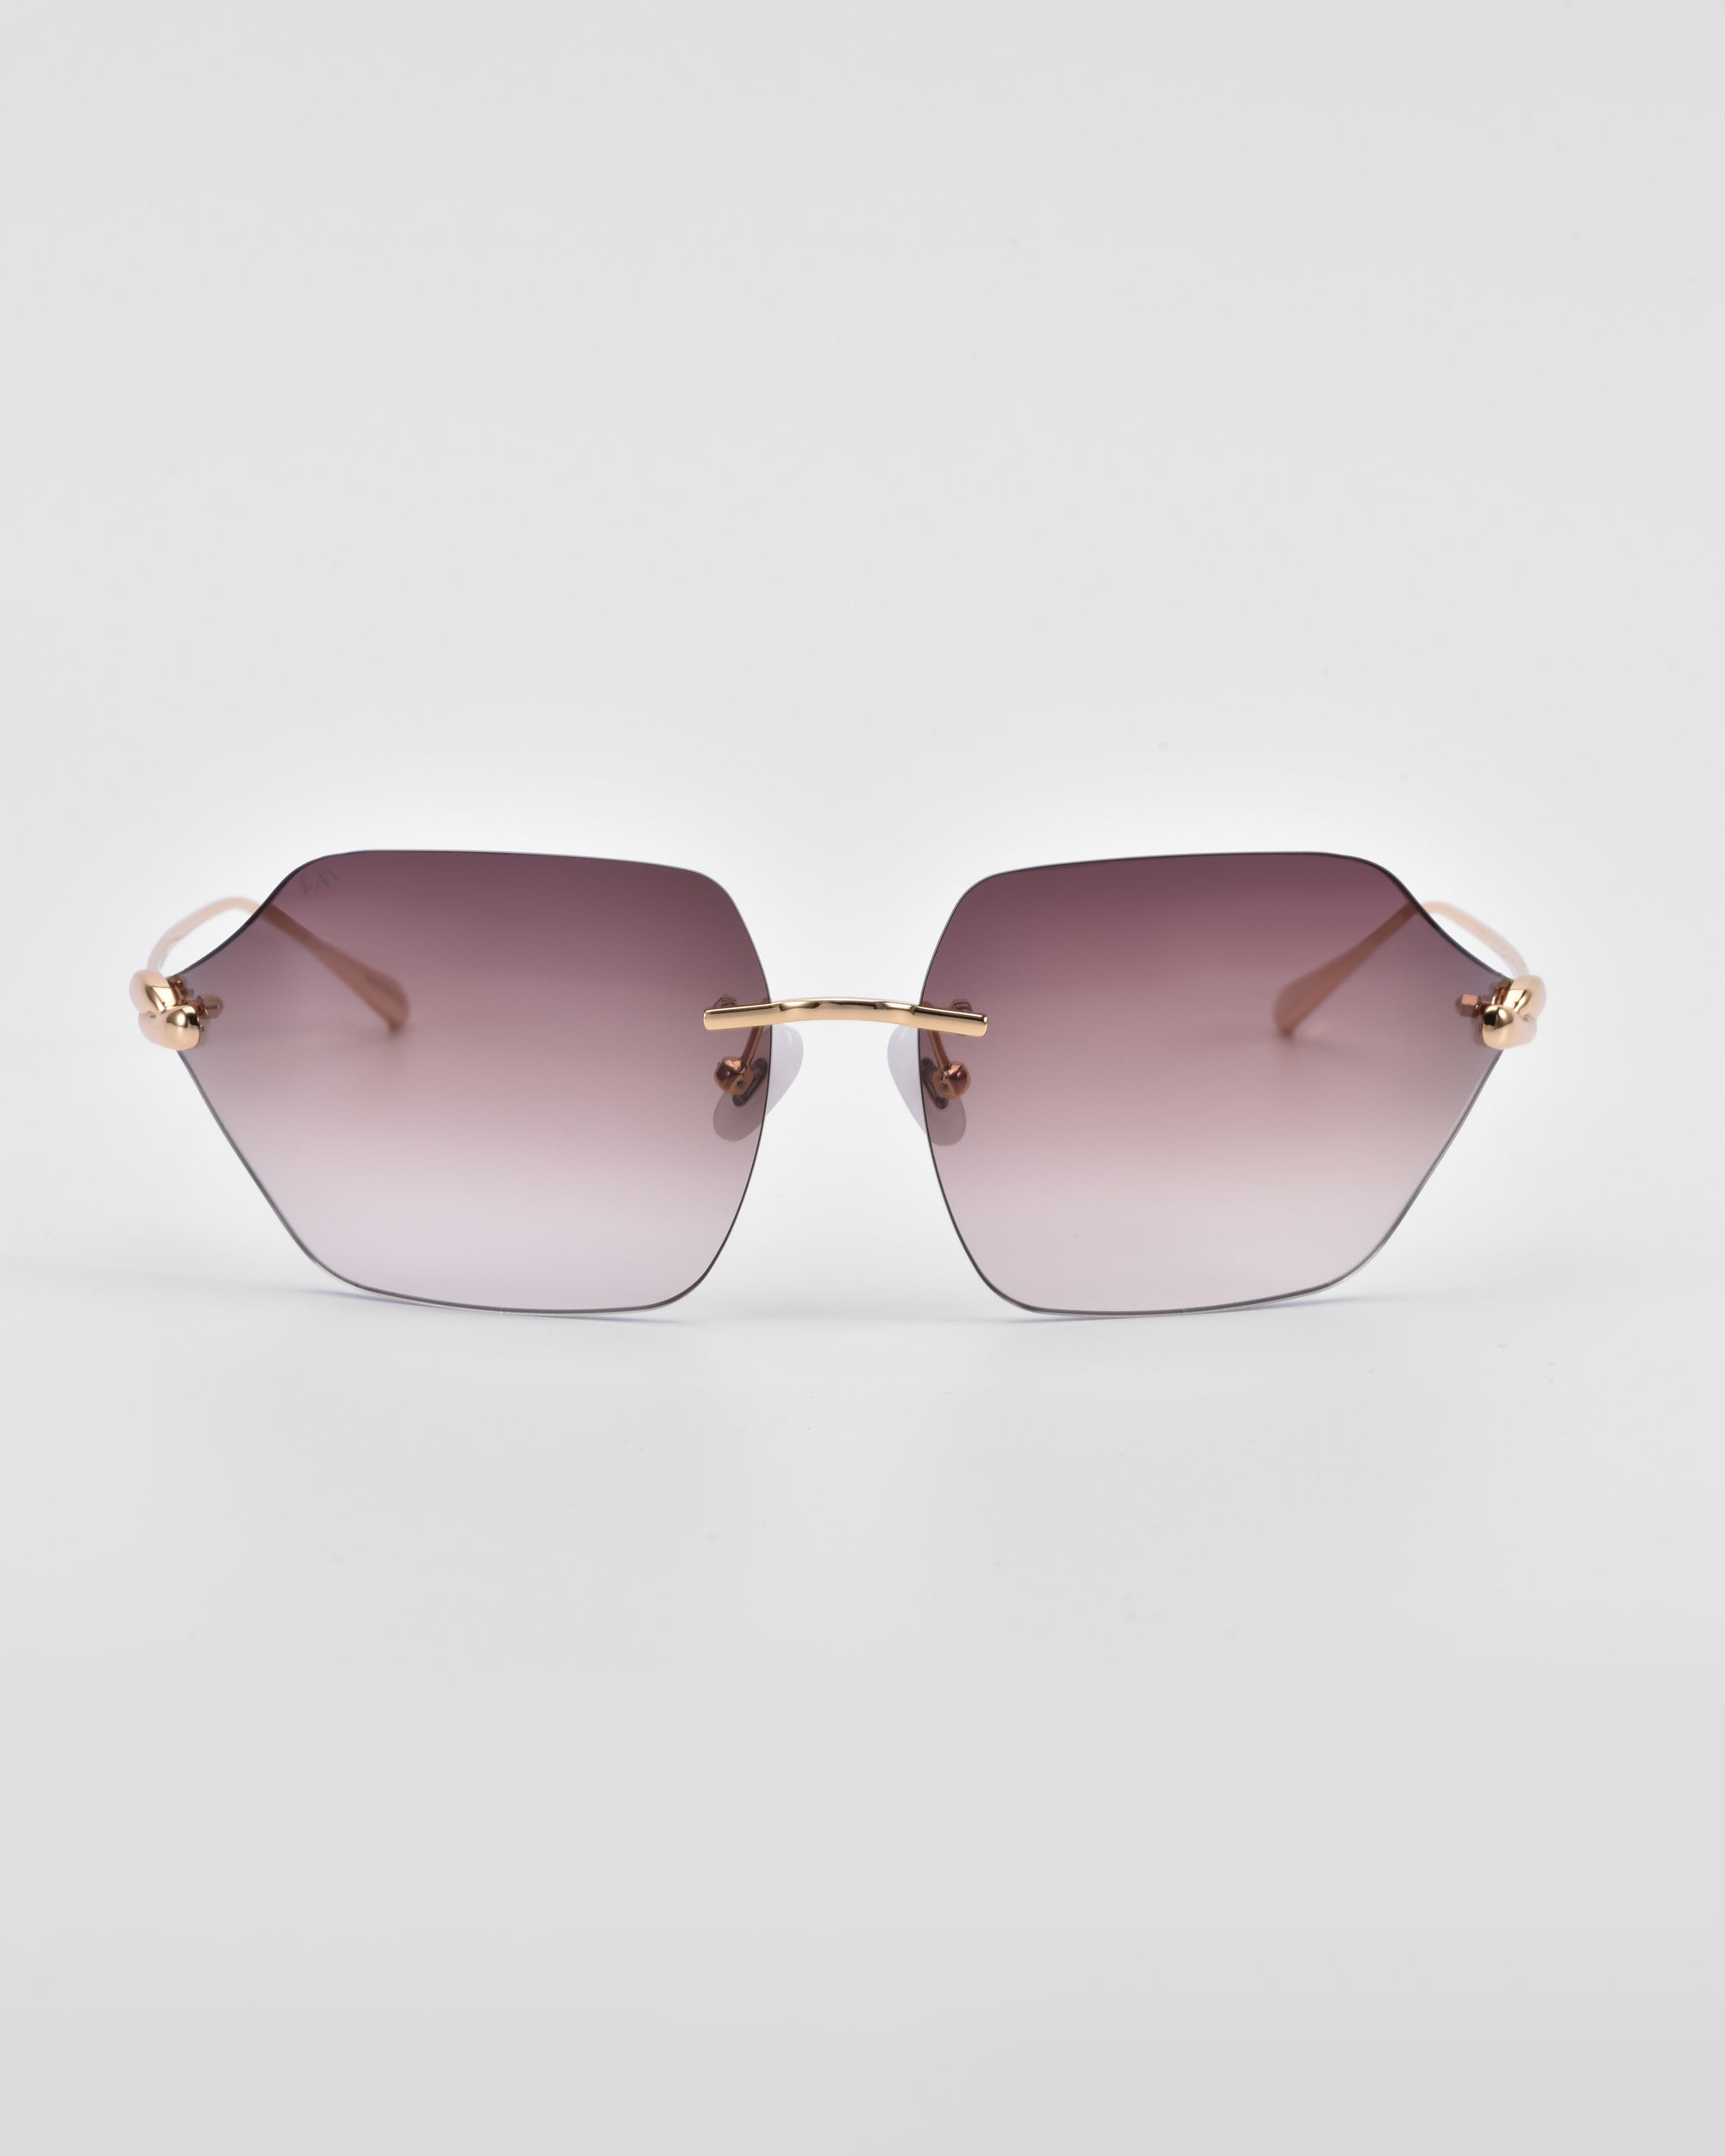 A pair of stylish, oversized hexagonal Serpent II sunglasses from For Art&#39;s Sake® with gradient lenses that transition from dark purple at the top to lighter at the bottom. The sunglasses feature 18-karat gold plating on the temples and a sleek, minimalist design. They are set against a plain white background.